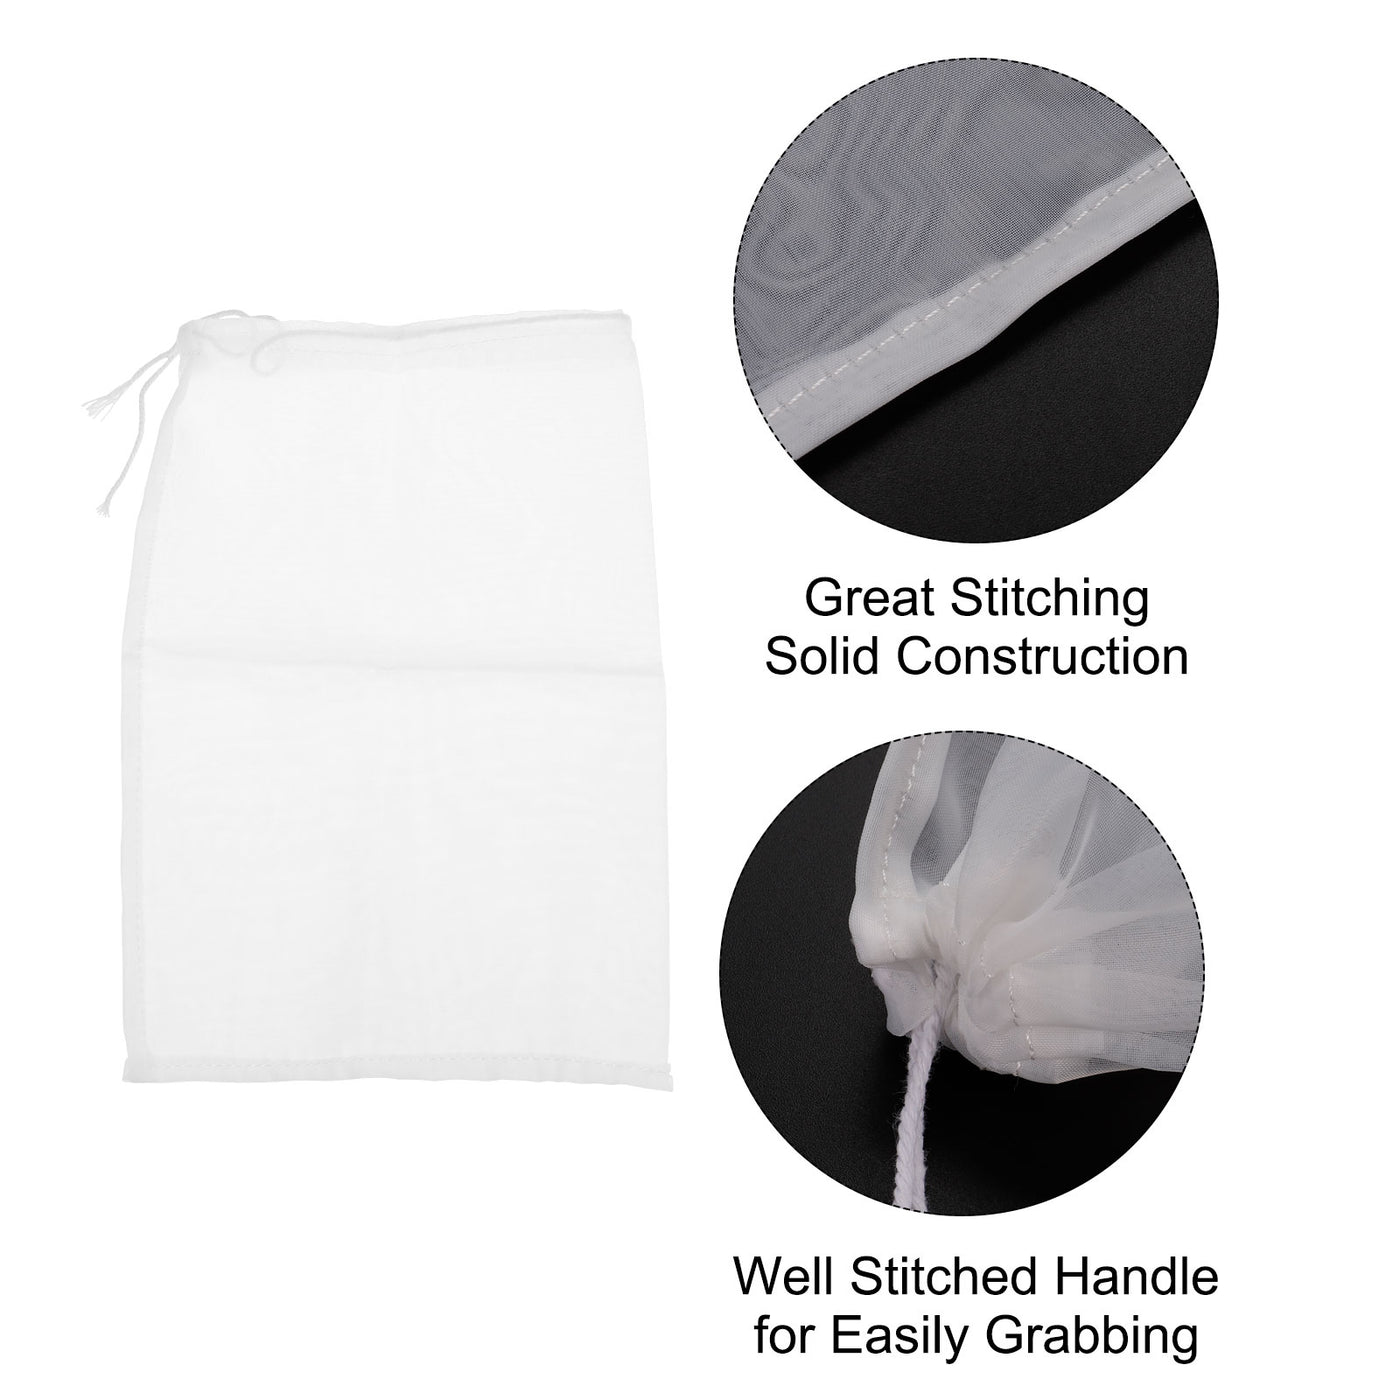 uxcell Uxcell Paint Filter Bag 80 Mesh (11.8"x7.9") Nylon Strainer for Filtering Paint